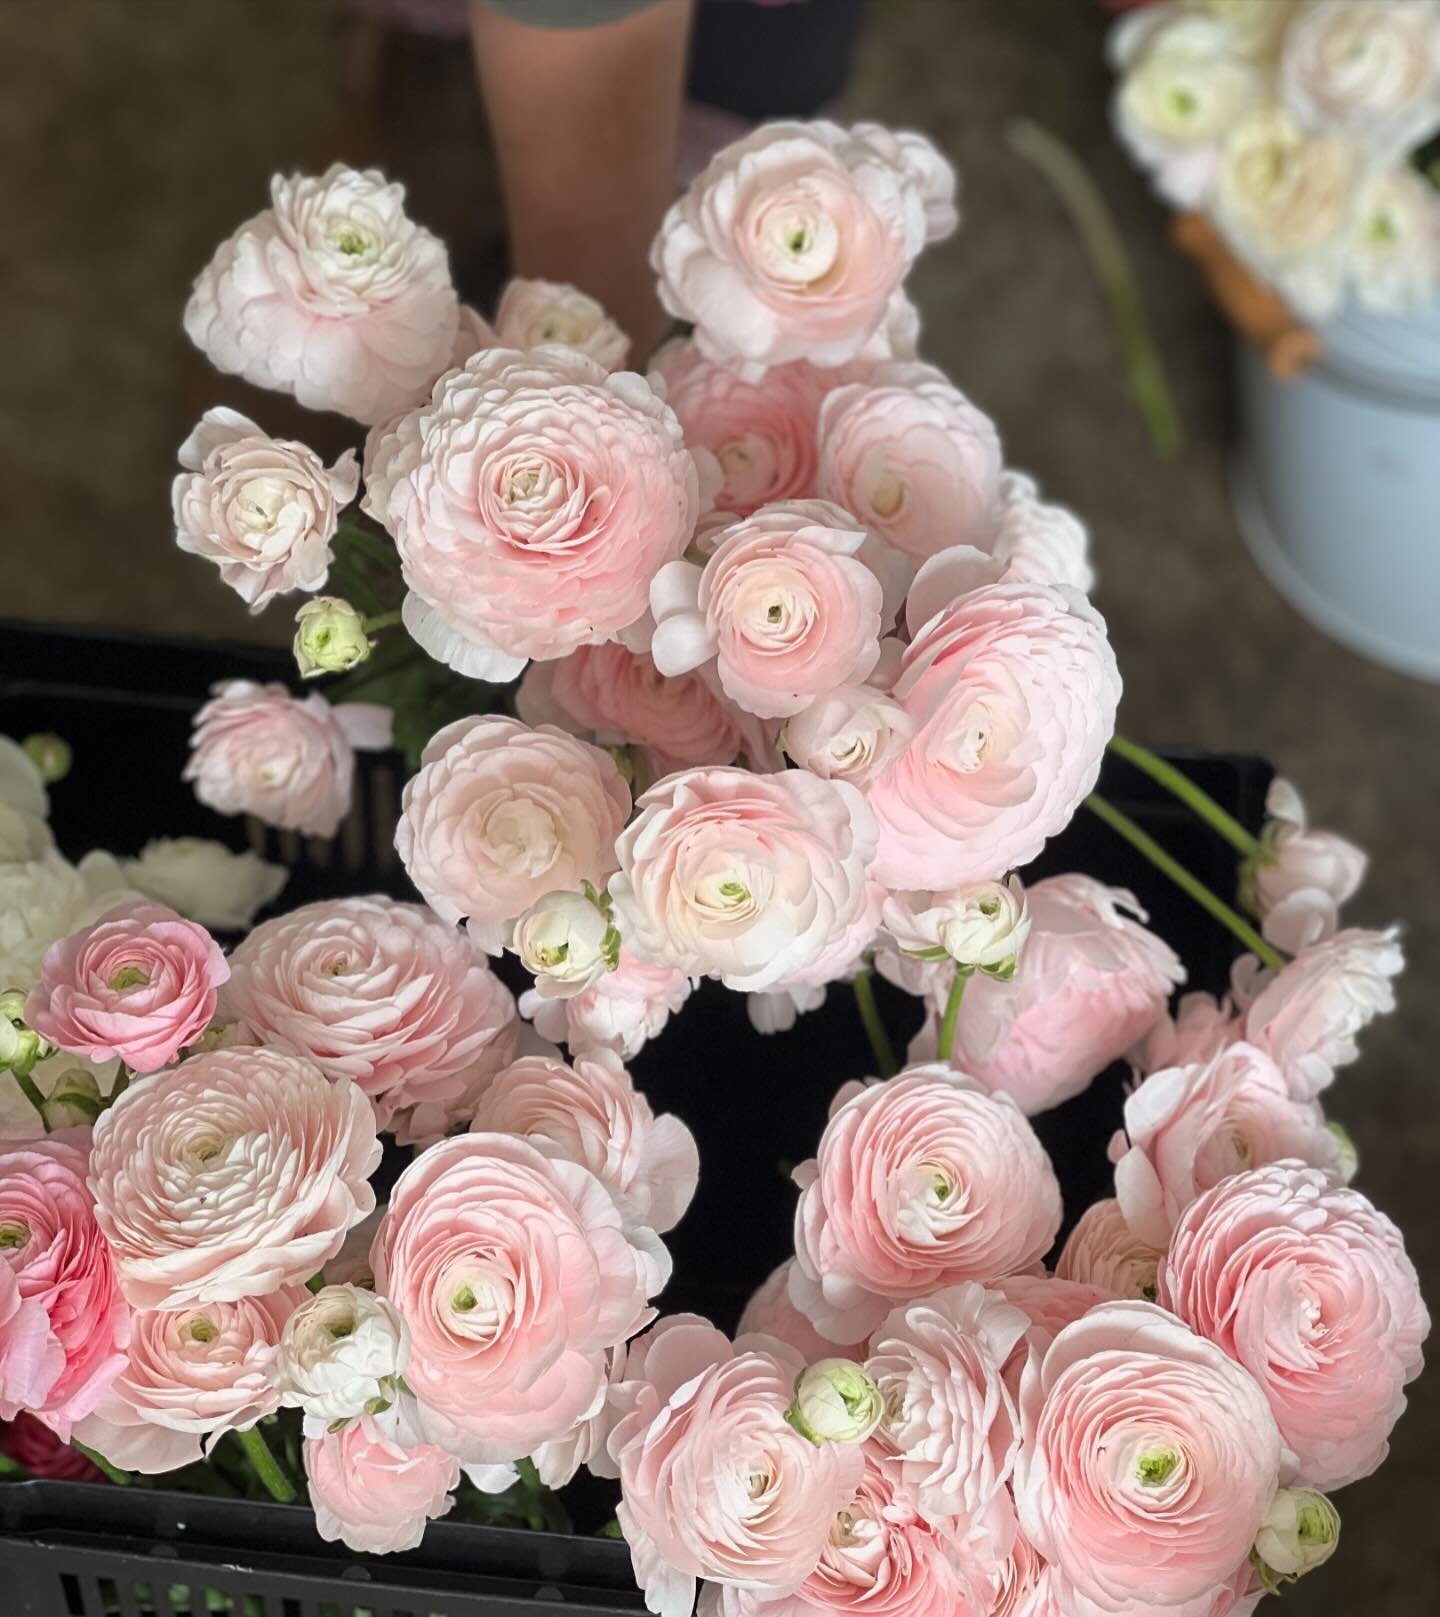 Our Italian Ranunculus are finally starting to bloom! Aren&rsquo;t these just gorgeous? 
#salmonranunculus #picoteeranunculus #springbulbs #springflowers #mothersdayflowers #mothersdaygift #picoteepink #growflowers #weddingflorals #onlinesale #shopsm